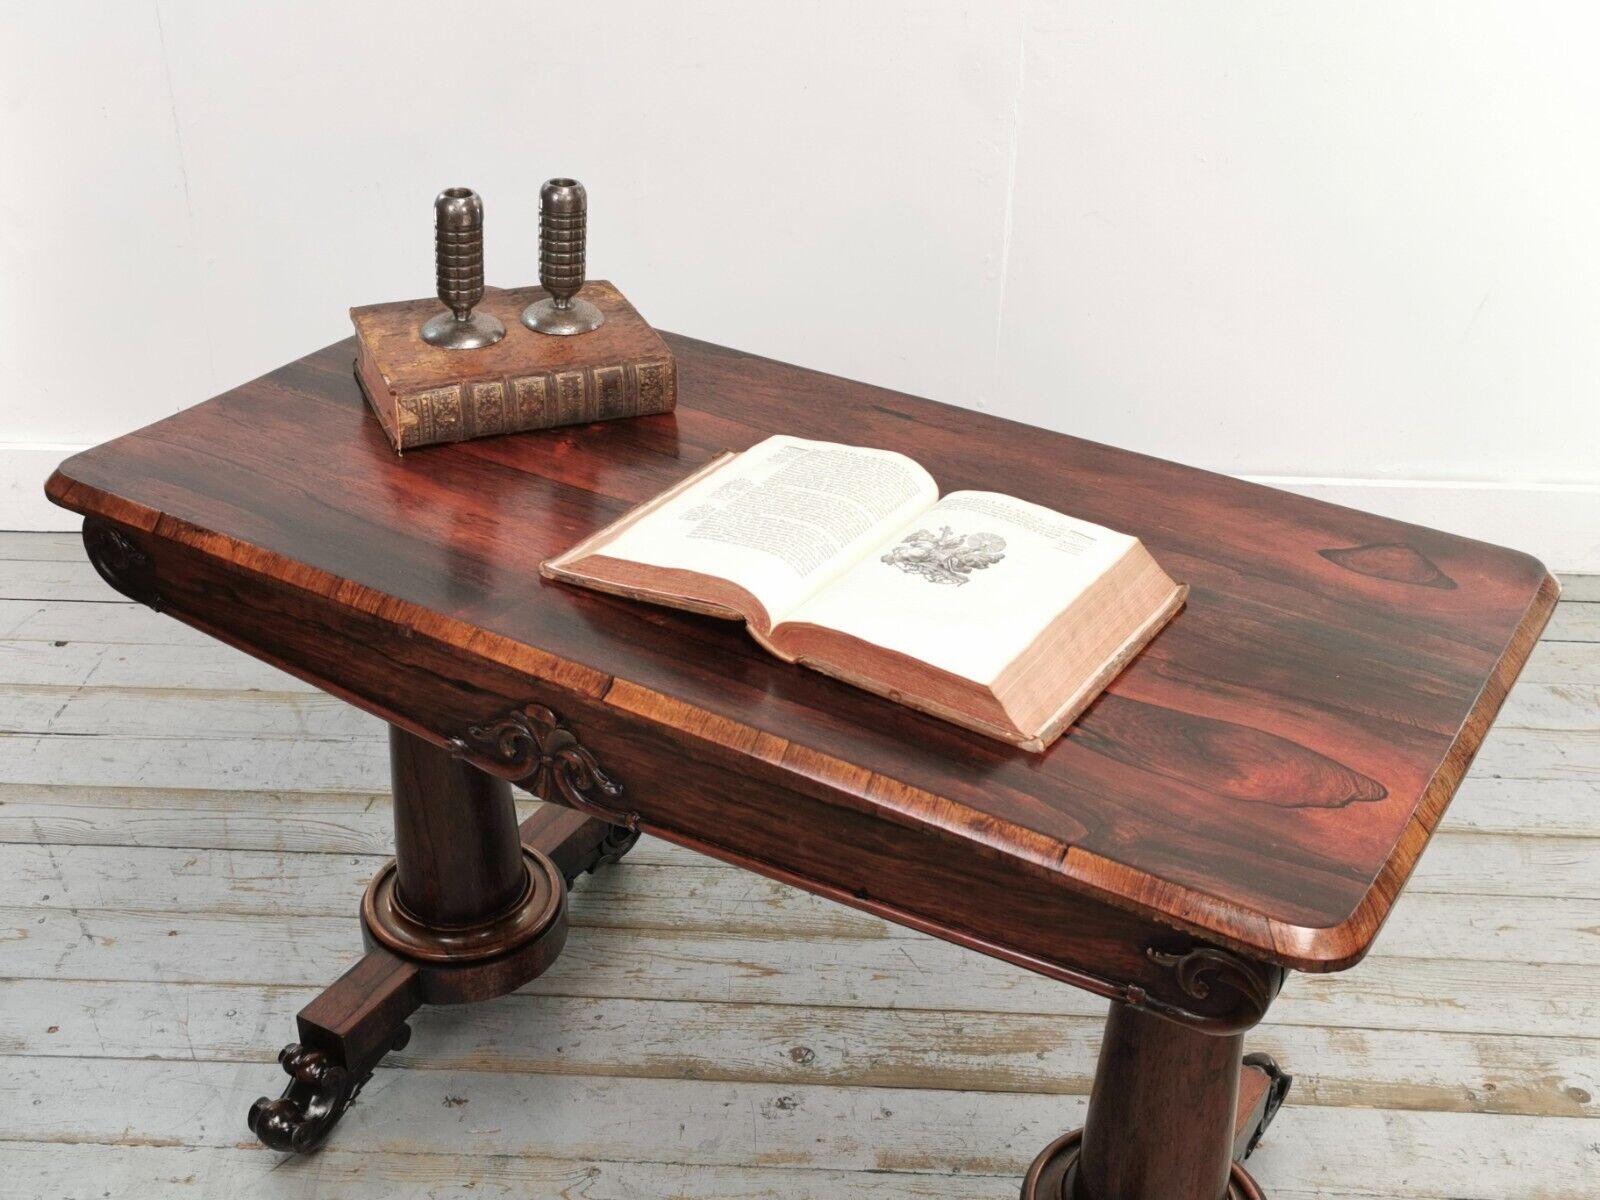 Early 19th century, William IV, Ornate Rosewood Library table on scrolling brass feet above castors with a large drawer to the front.

This high-quality piece has a really beautiful deep Rosewood colour and patina and is in excellent condition for